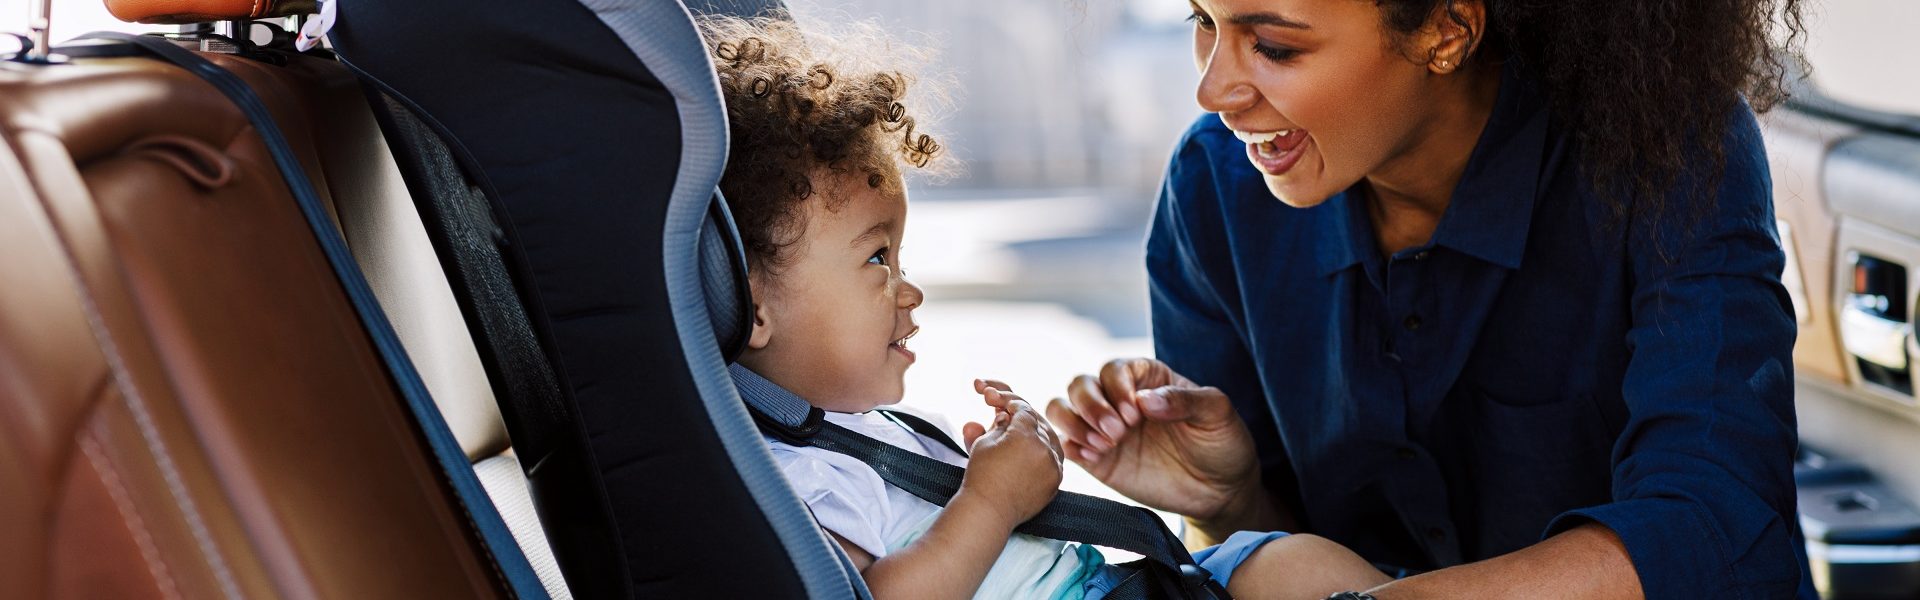 What are the rules for child seats in rental cars?